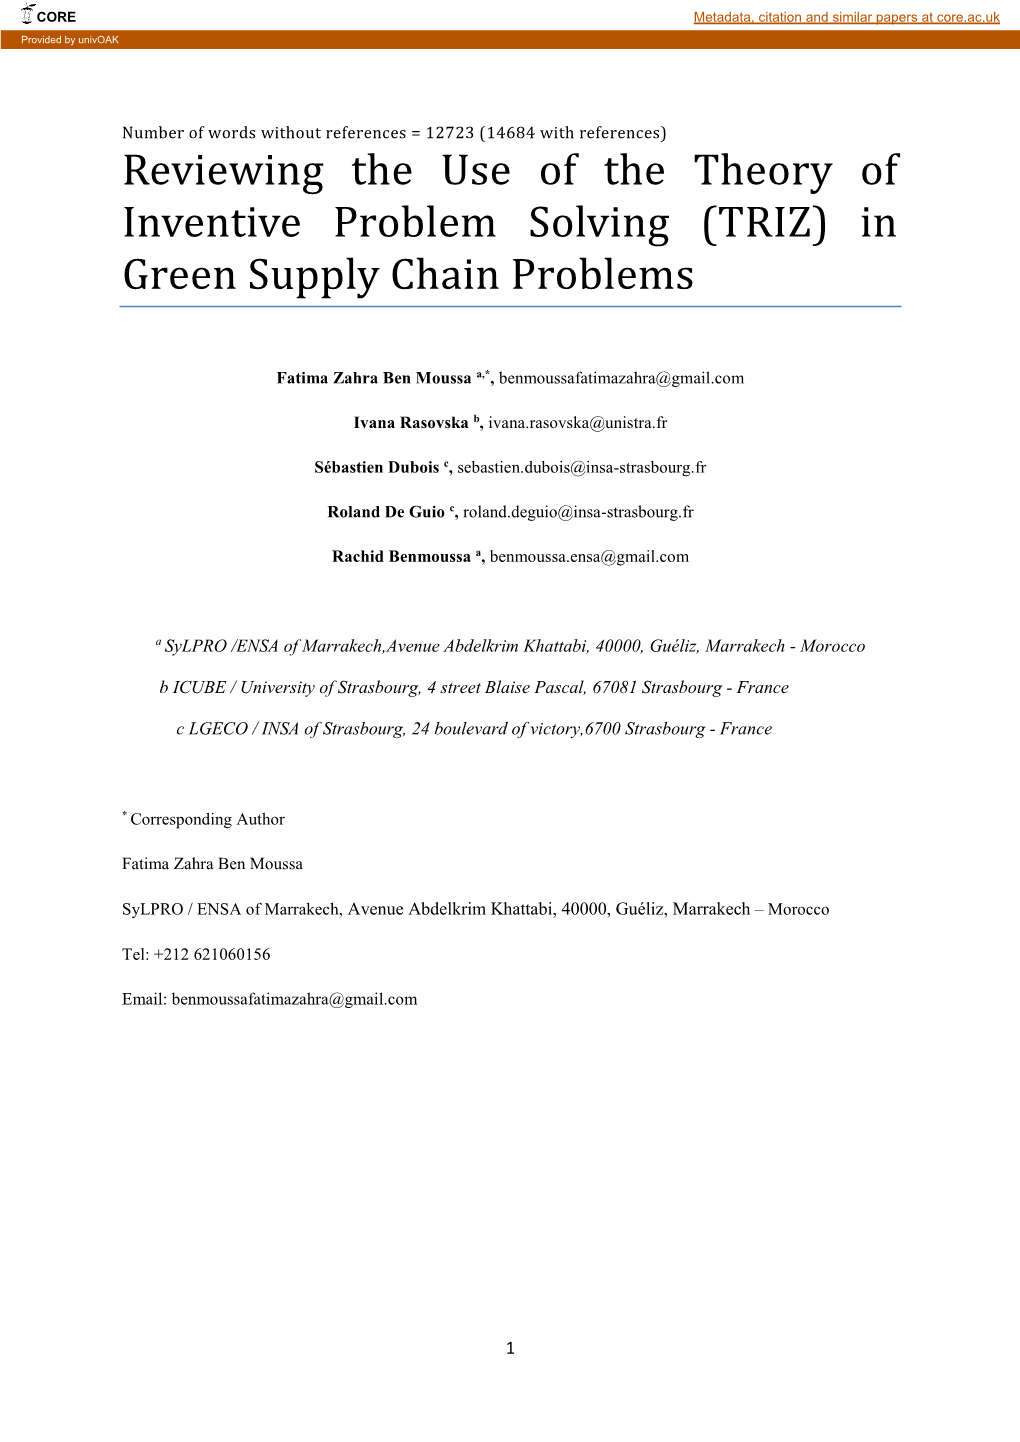 Reviewing the Use of the Theory of Inventive Problem Solving (TRIZ) in Green Supply Chain Problems